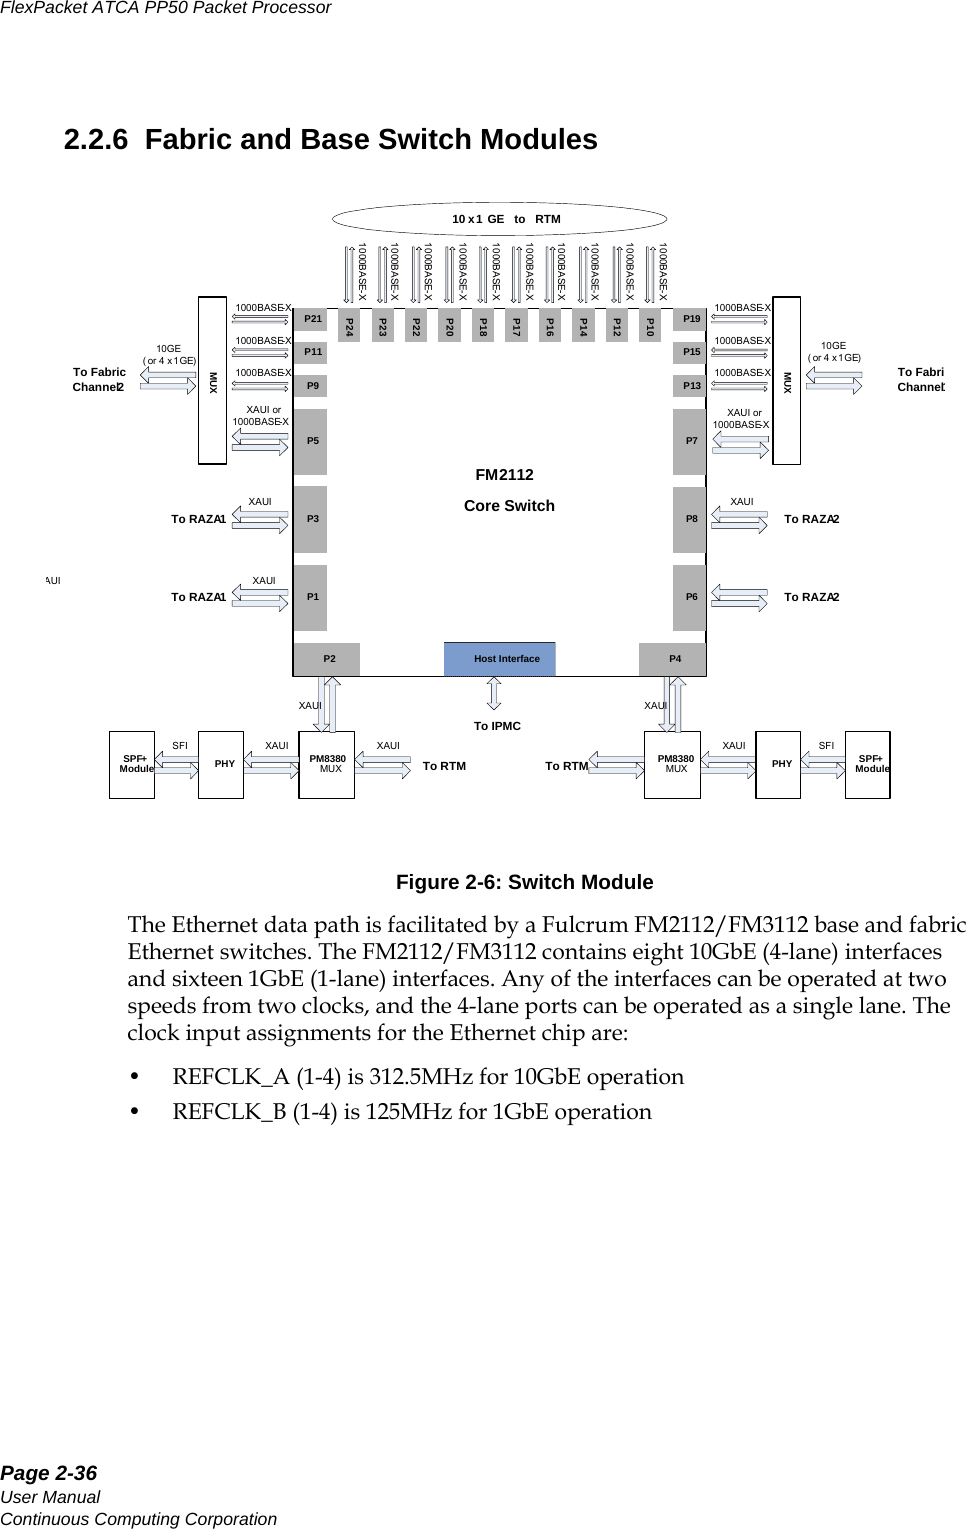 Page 2-36User ManualContinuous Computing CorporationFlexPacket ATCA PP50 Packet Processor     Preliminary2.2.6  Fabric and Base Switch ModulesFigure 2-6: Switch ModuleThe Ethernet data path is facilitated by a Fulcrum FM2112/FM3112 base and fabric Ethernet switches. The FM2112/FM3112 contains eight 10GbE (4-lane) interfaces and sixteen 1GbE (1-lane) interfaces. Any of the interfaces can be operated at two speeds from two clocks, and the 4-lane ports can be operated as a single lane. The clock input assignments for the Ethernet chip are:• REFCLK_A (1-4) is 312.5MHz for 10GbE operation• REFCLK_B (1-4) is 125MHz for 1GbE operationFM2112Core SwitchP1P2P24Host InterfaceP9P4P6P3 P8P5 P7P13P11 P15P21 P19P23P22P20P18P17P10P16P14P12To IPMCPM8380MUXXAUITo RTM PM8380MUXXAUITo RTMTo RAZA 1To RAZA 1To RAZA 2To RAZA 2XAUI XAUI XAUIPHY PHYSPF+Module SPF+ModuleSFI SFIXAUI or 1000BASE-X XAUI or 1000BASE-X1000BASE-X1000BASE-X1000BASE-X1000BASE-X1000BASE-X1000BASE-X1000BASE-X1000BASE-X1000BASE-X1000BASE-X1000BASE-X1000BASE-X1000BASE-X1000BASE-X1000BASE-X1000BASE-X10 x 1 GE   to   RTMMUXMUX10GE (or 4 x 1GE)10GE (or 4 x 1GE)To FabricChannel 2To FabriChannel 1XAUIXAUIXAUIAUI